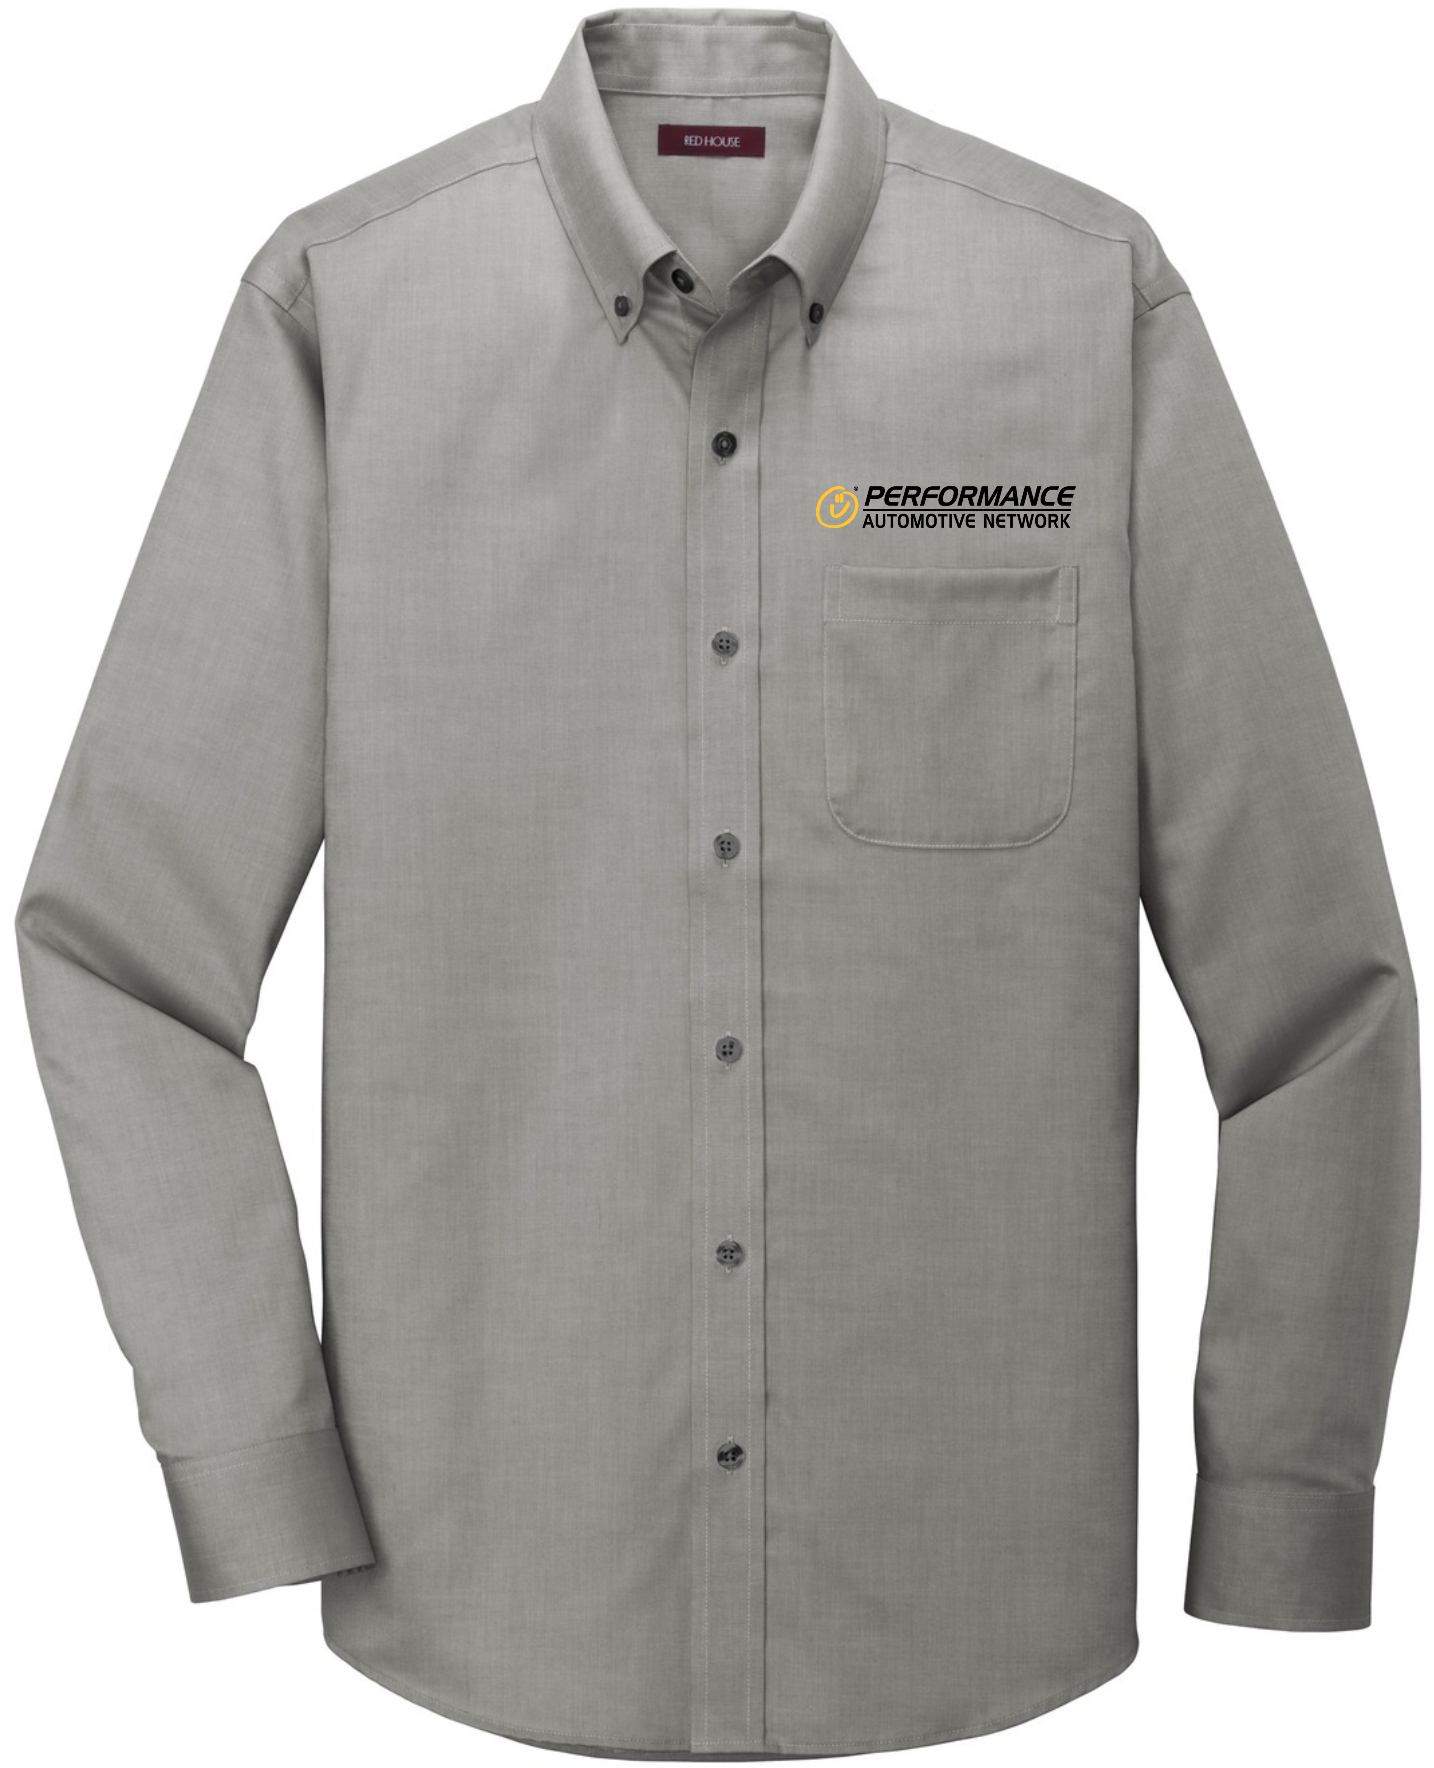 Performance Automotive Network - RH240 Red House® Pinpoint Oxford Non-Iron Shirt